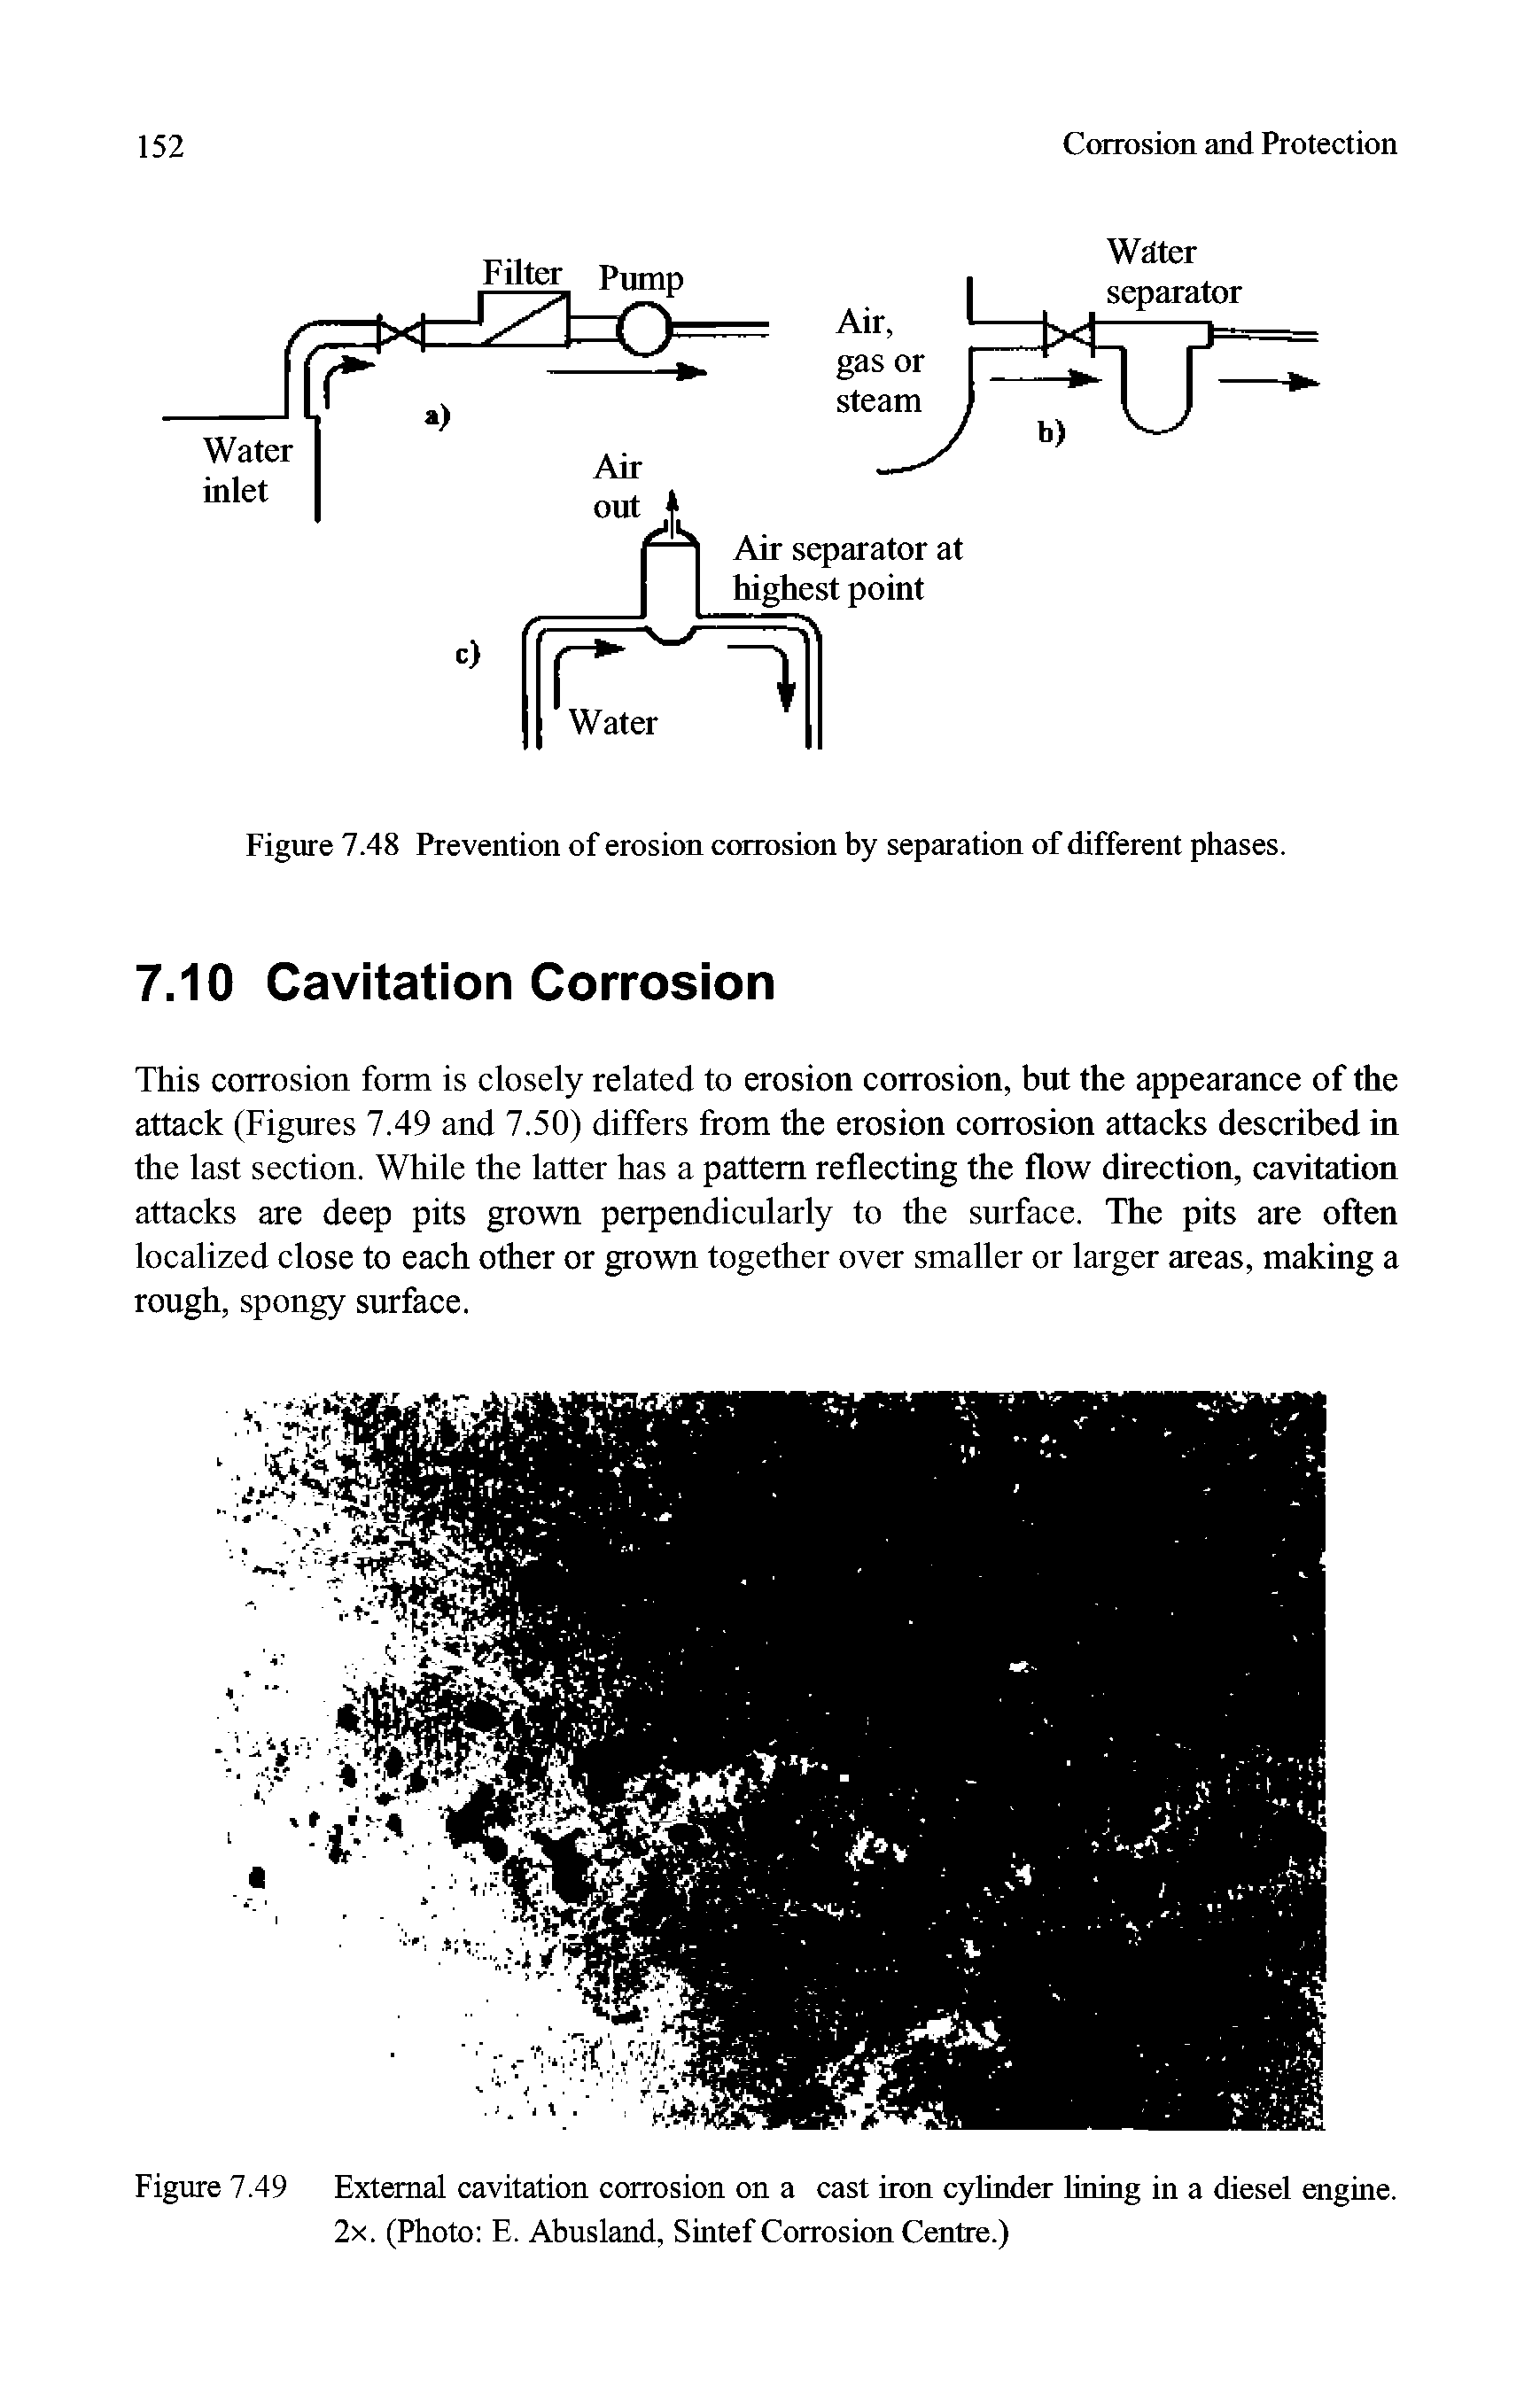 Figure 7.48 Prevention of erosion corrosion by separation of different phases.